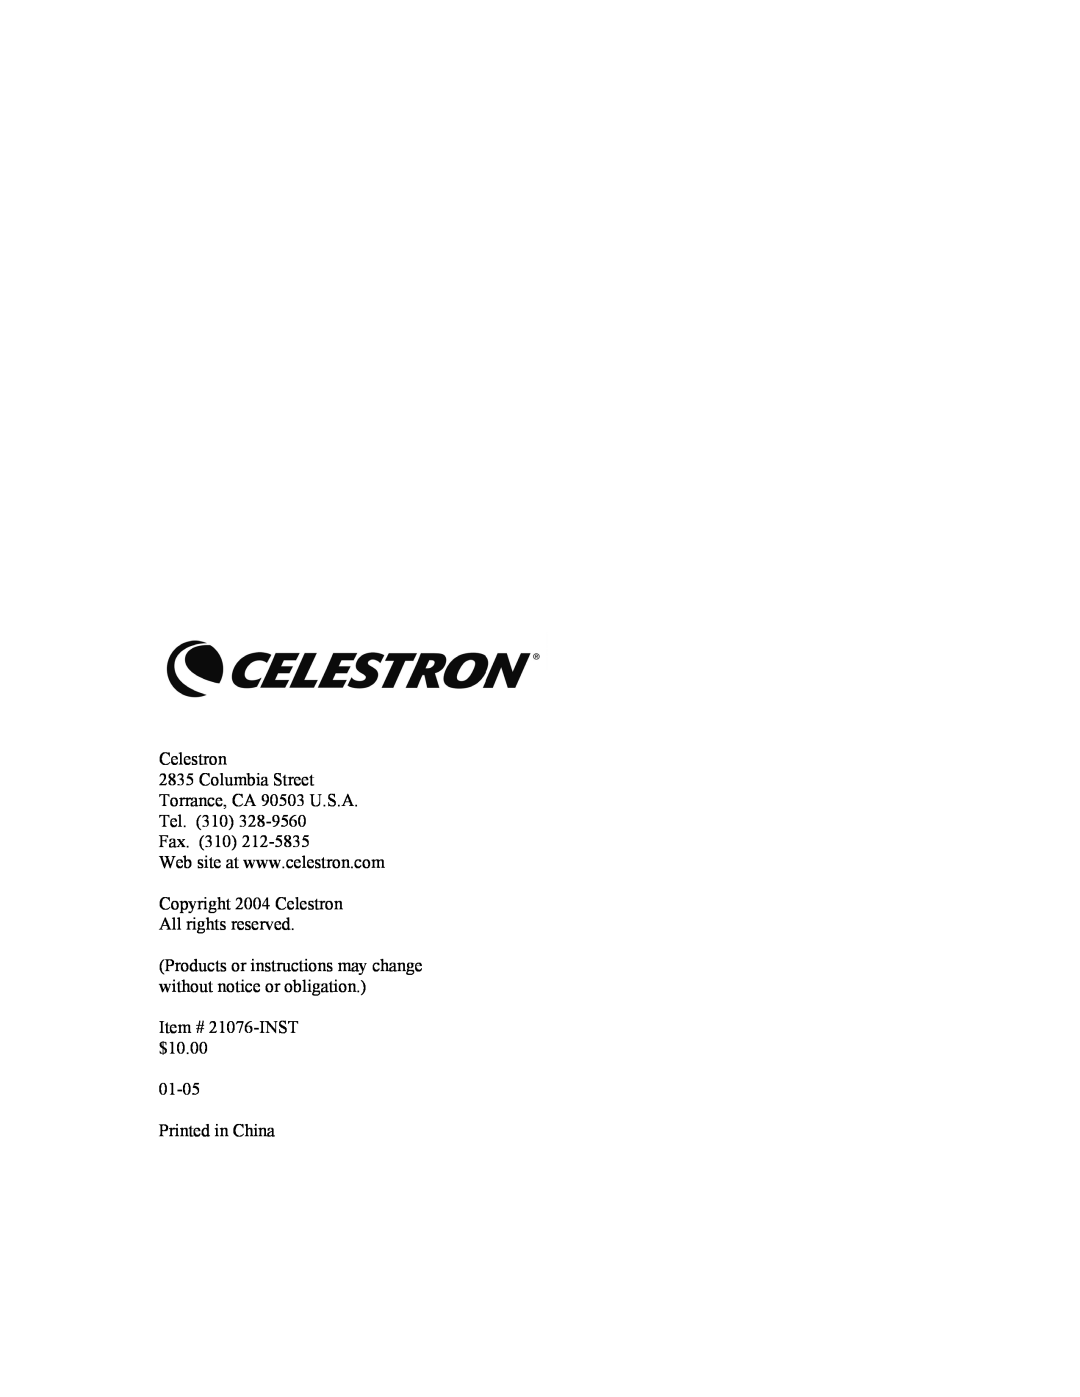 Celestron 70 manual Copyright 2004 Celestron All rights reserved 